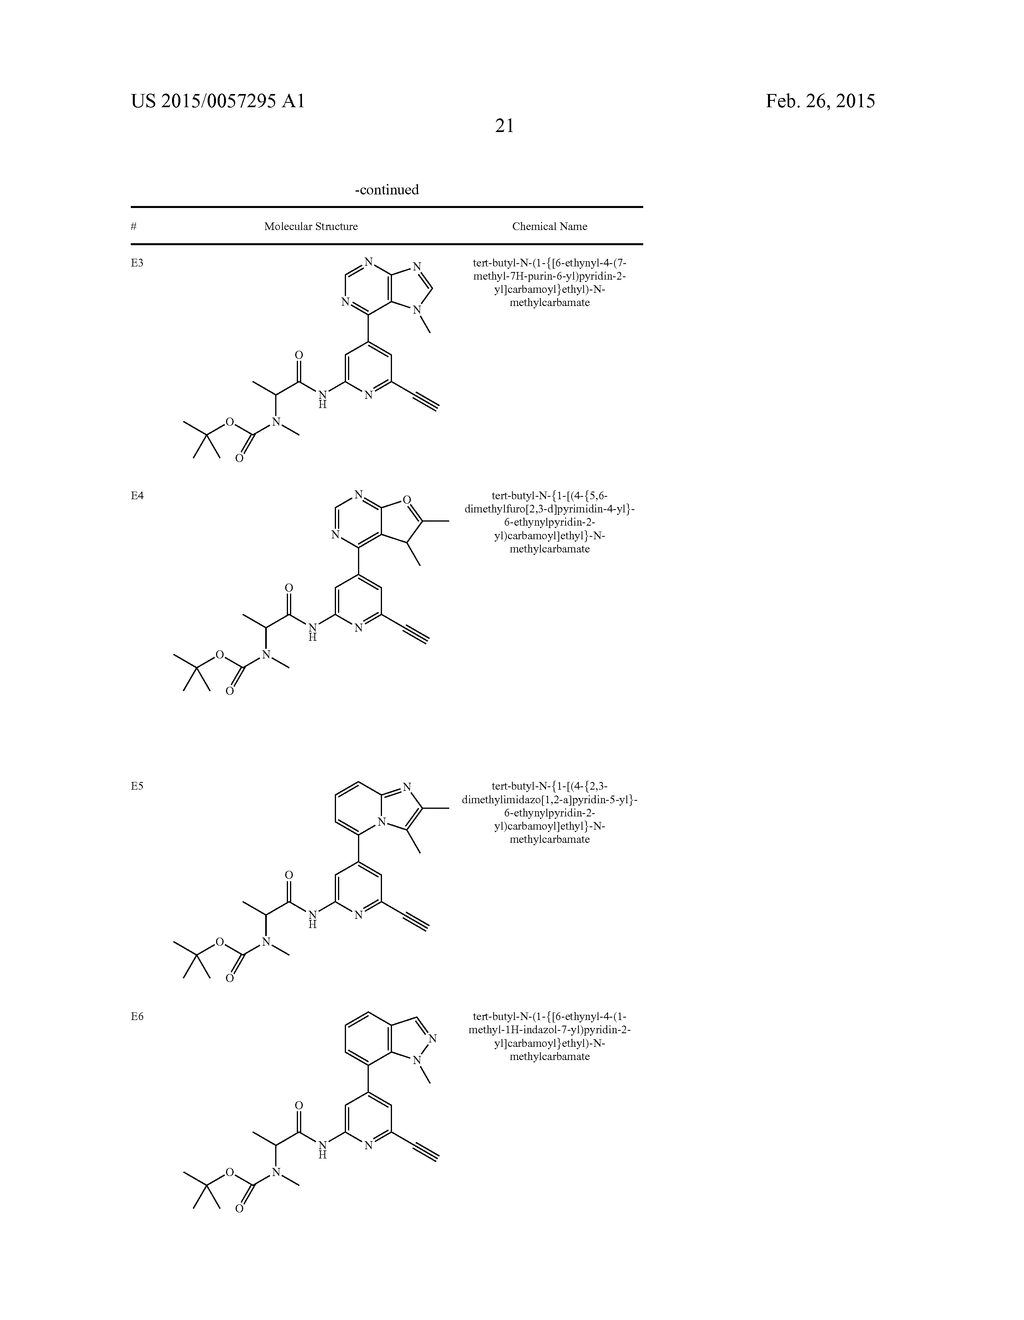 New 6-Alkynyl Pyridine - diagram, schematic, and image 22